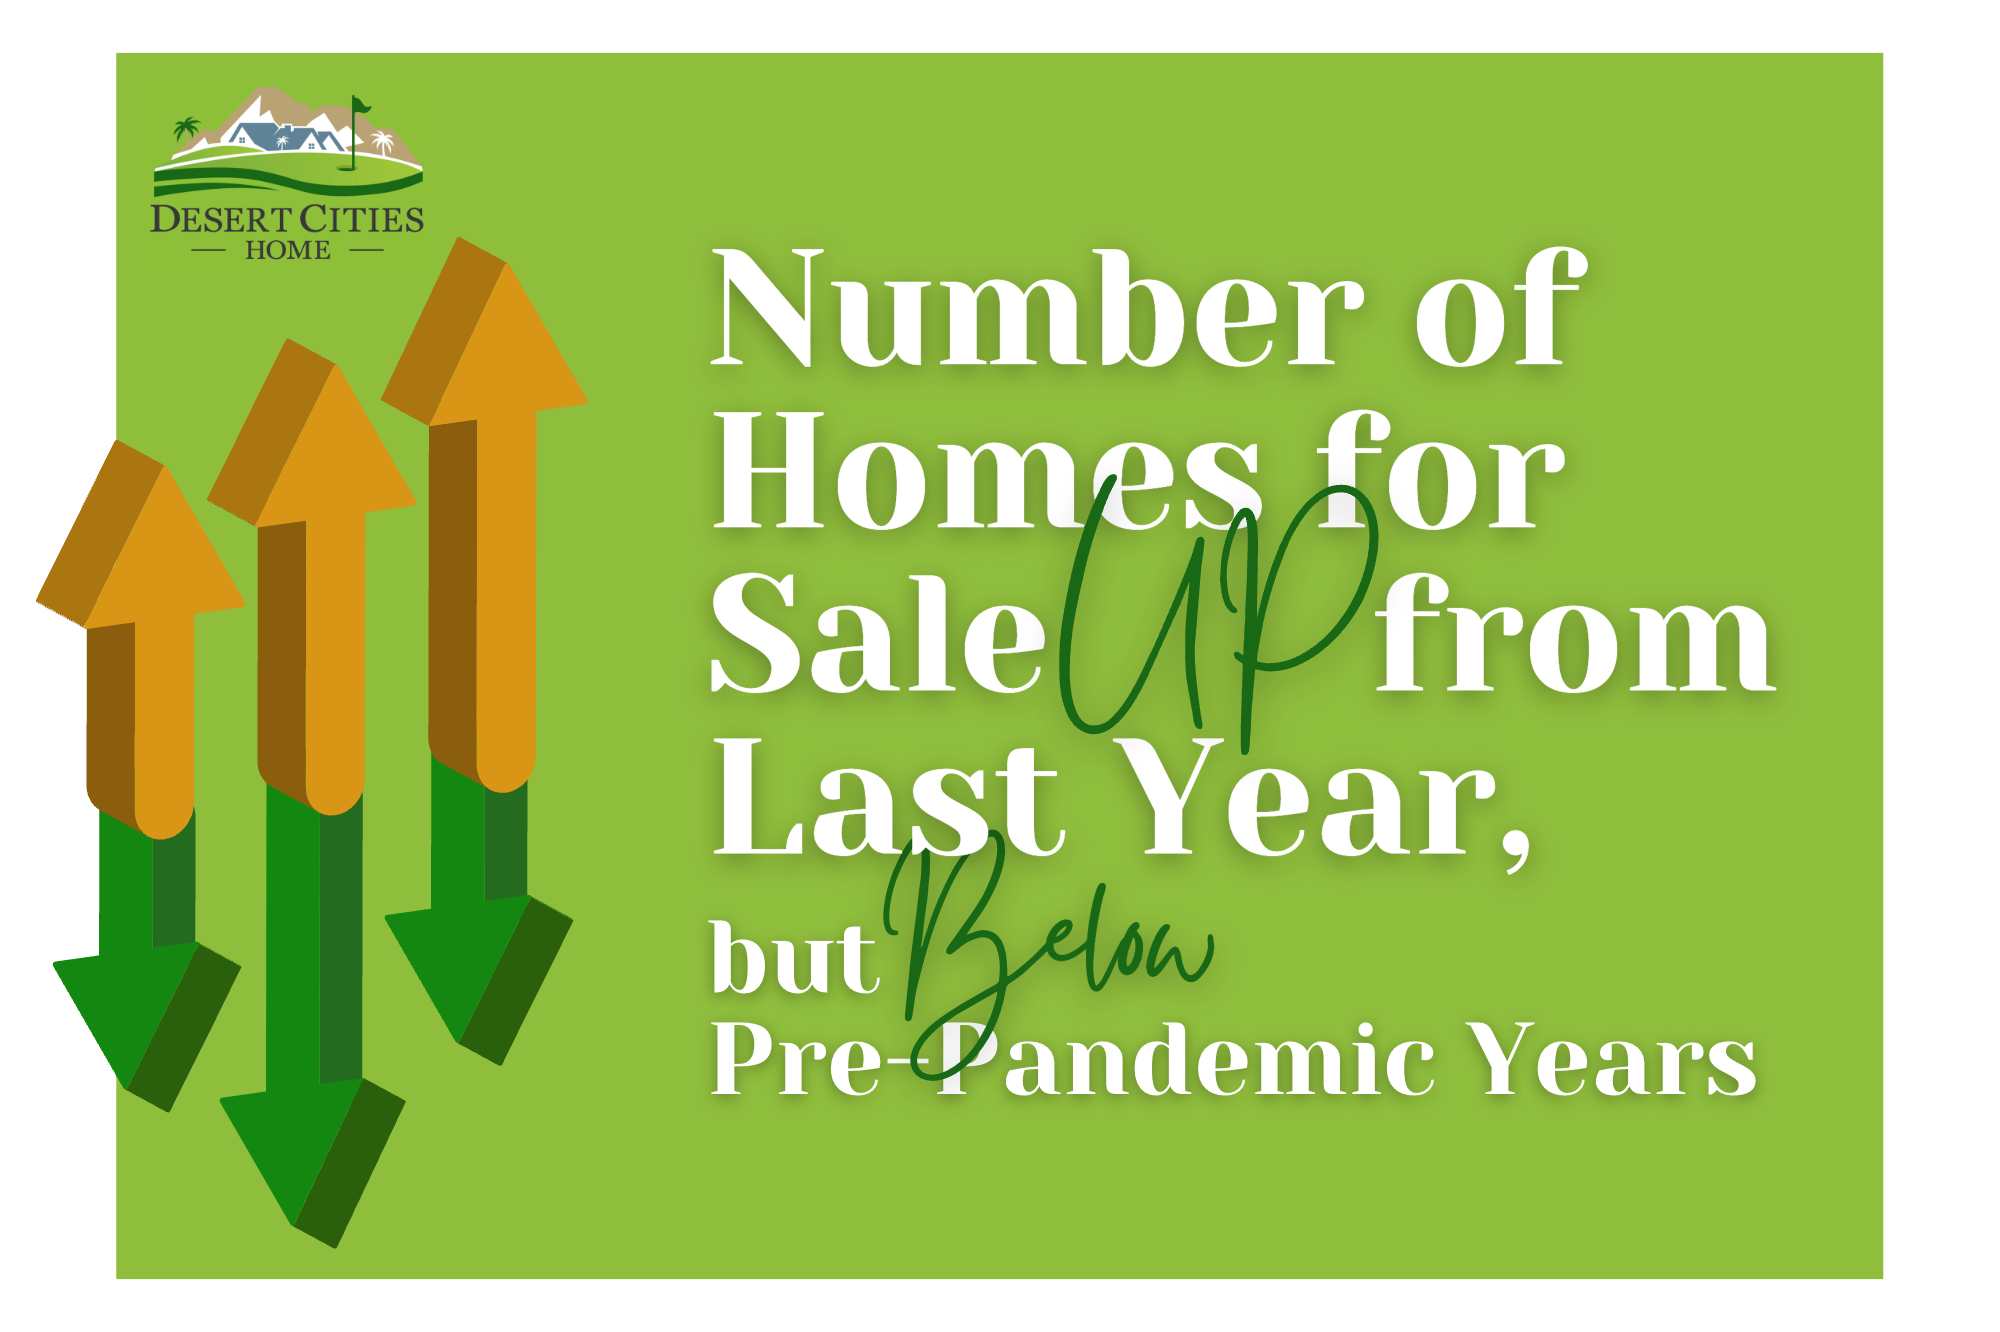 Number of Homes for Sale Up from Last Year, but Below Pre-Pandemic Years